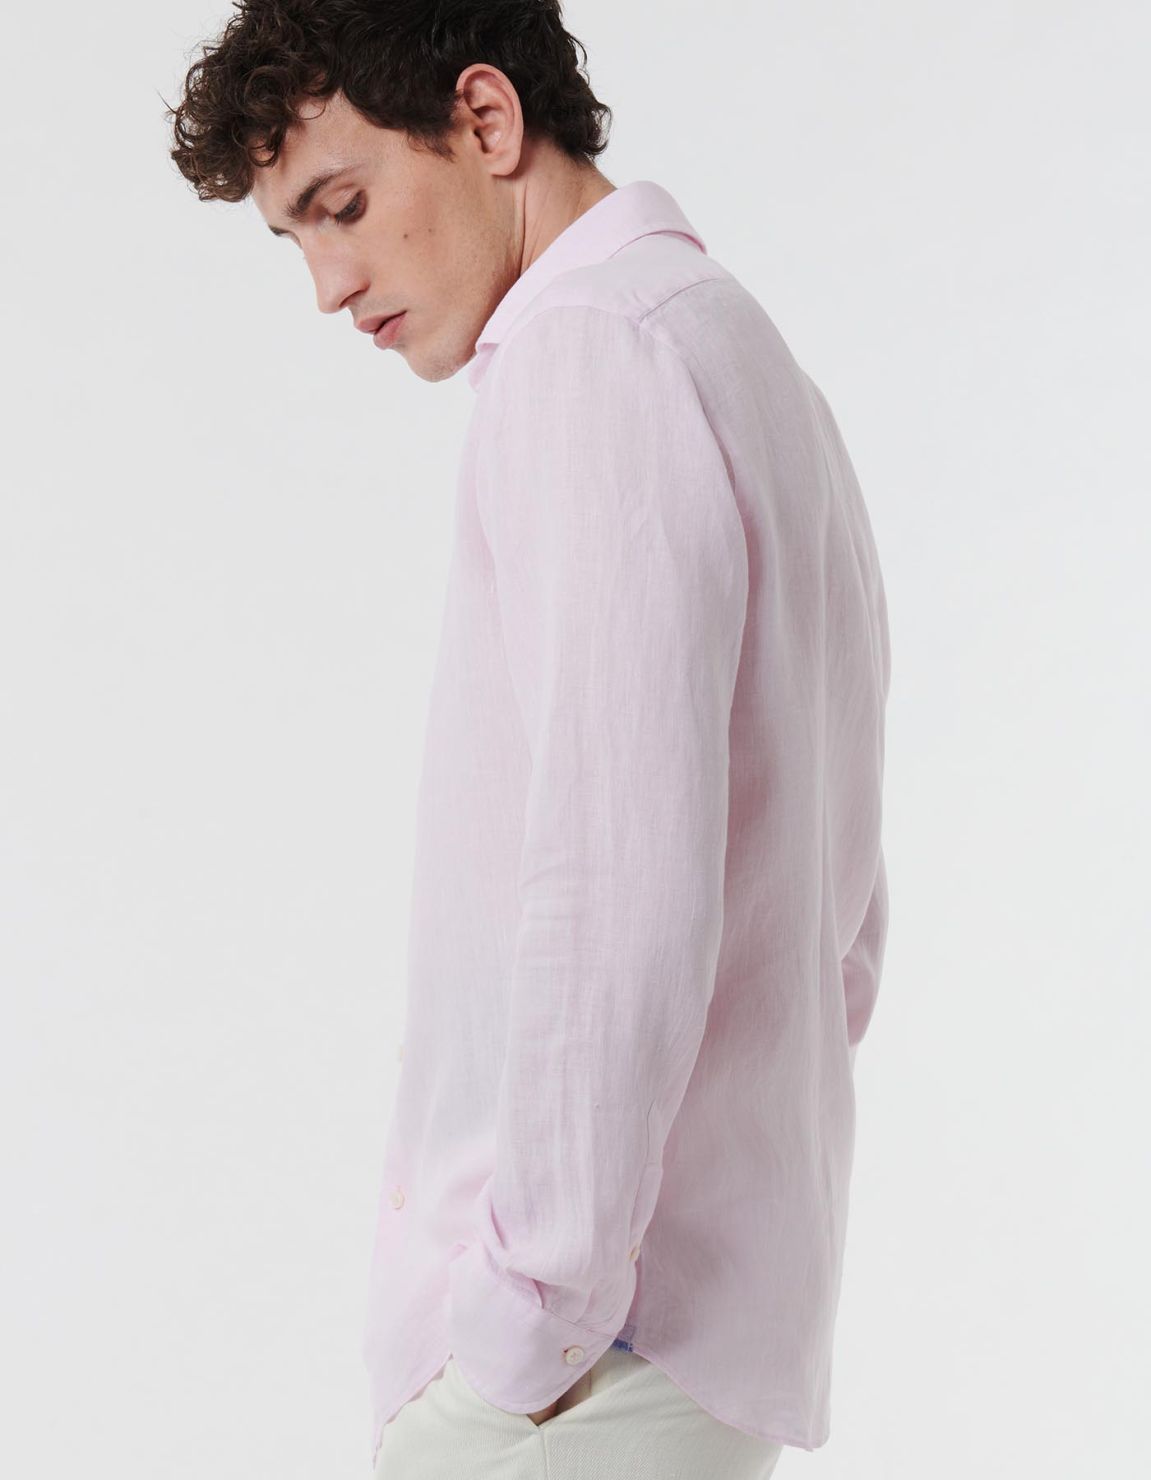 Pale Pink Linen Solid colour Shirt Collar small cutaway Tailor Custom Fit 7